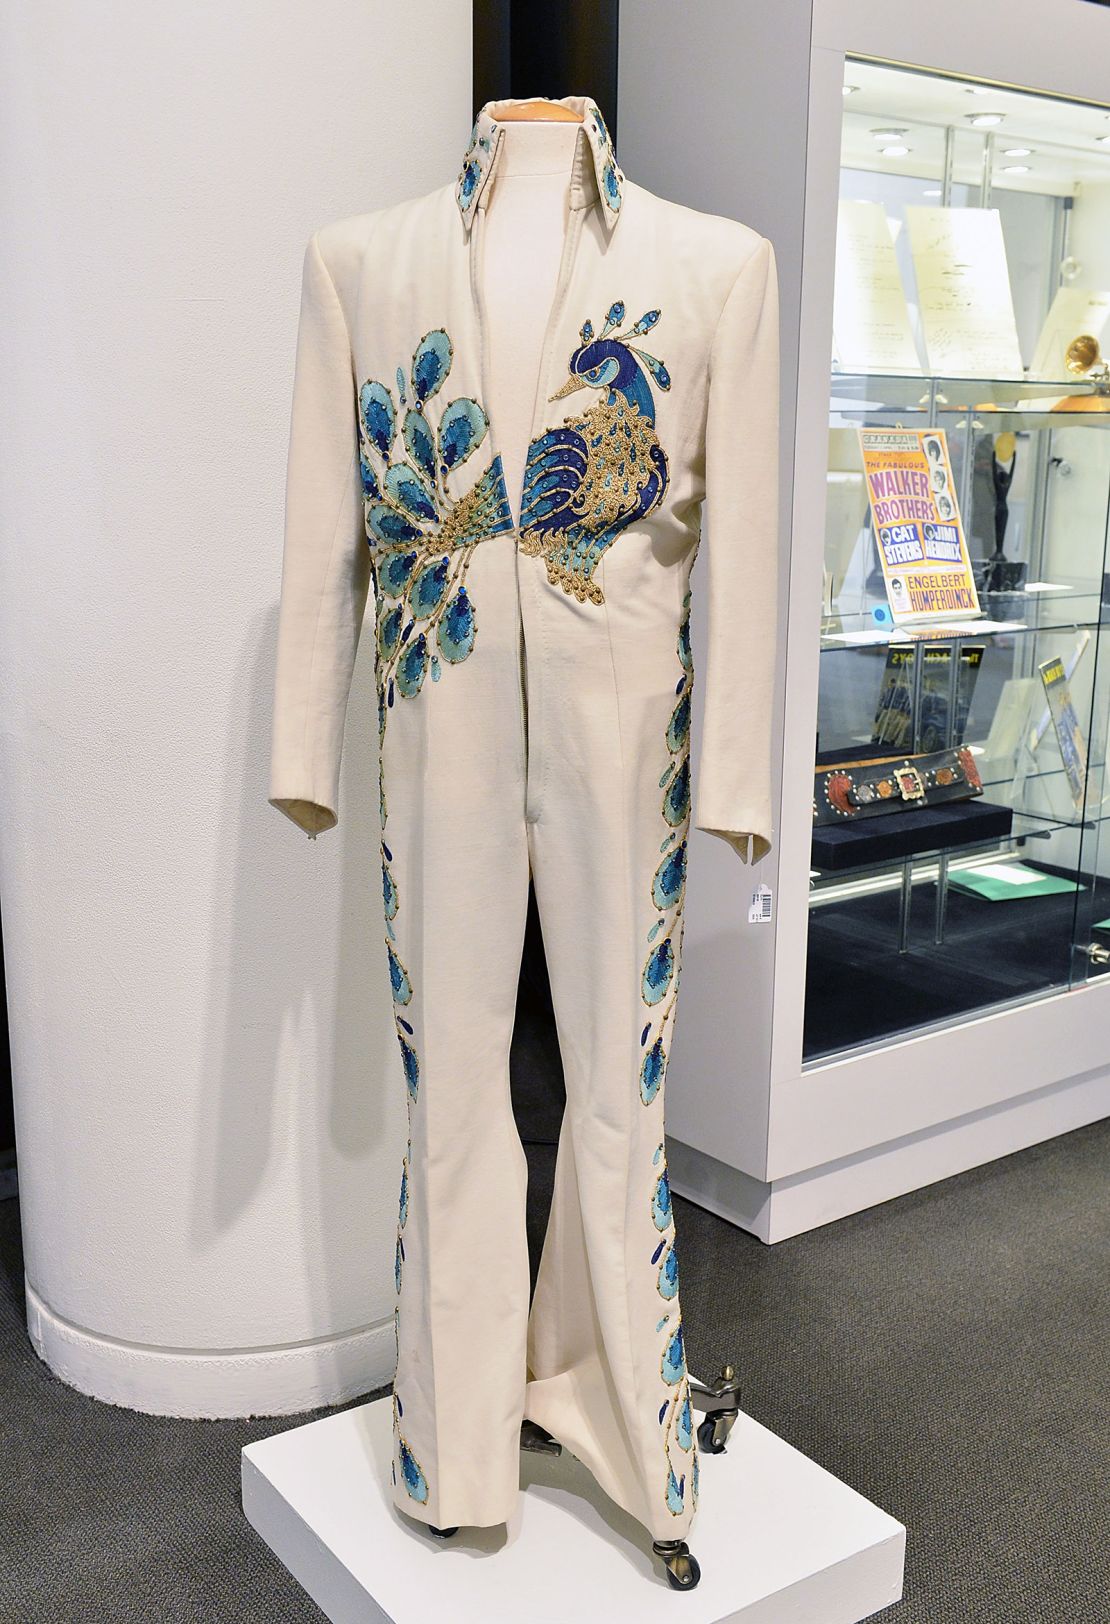 Elvis Presley's Peacock Jumpsuit worn during concert apperances in 1974, shown at the press preview "A Rock & Roll History: Presley To Punk" at Sotheby's on June 20, 2014 in New York City. 